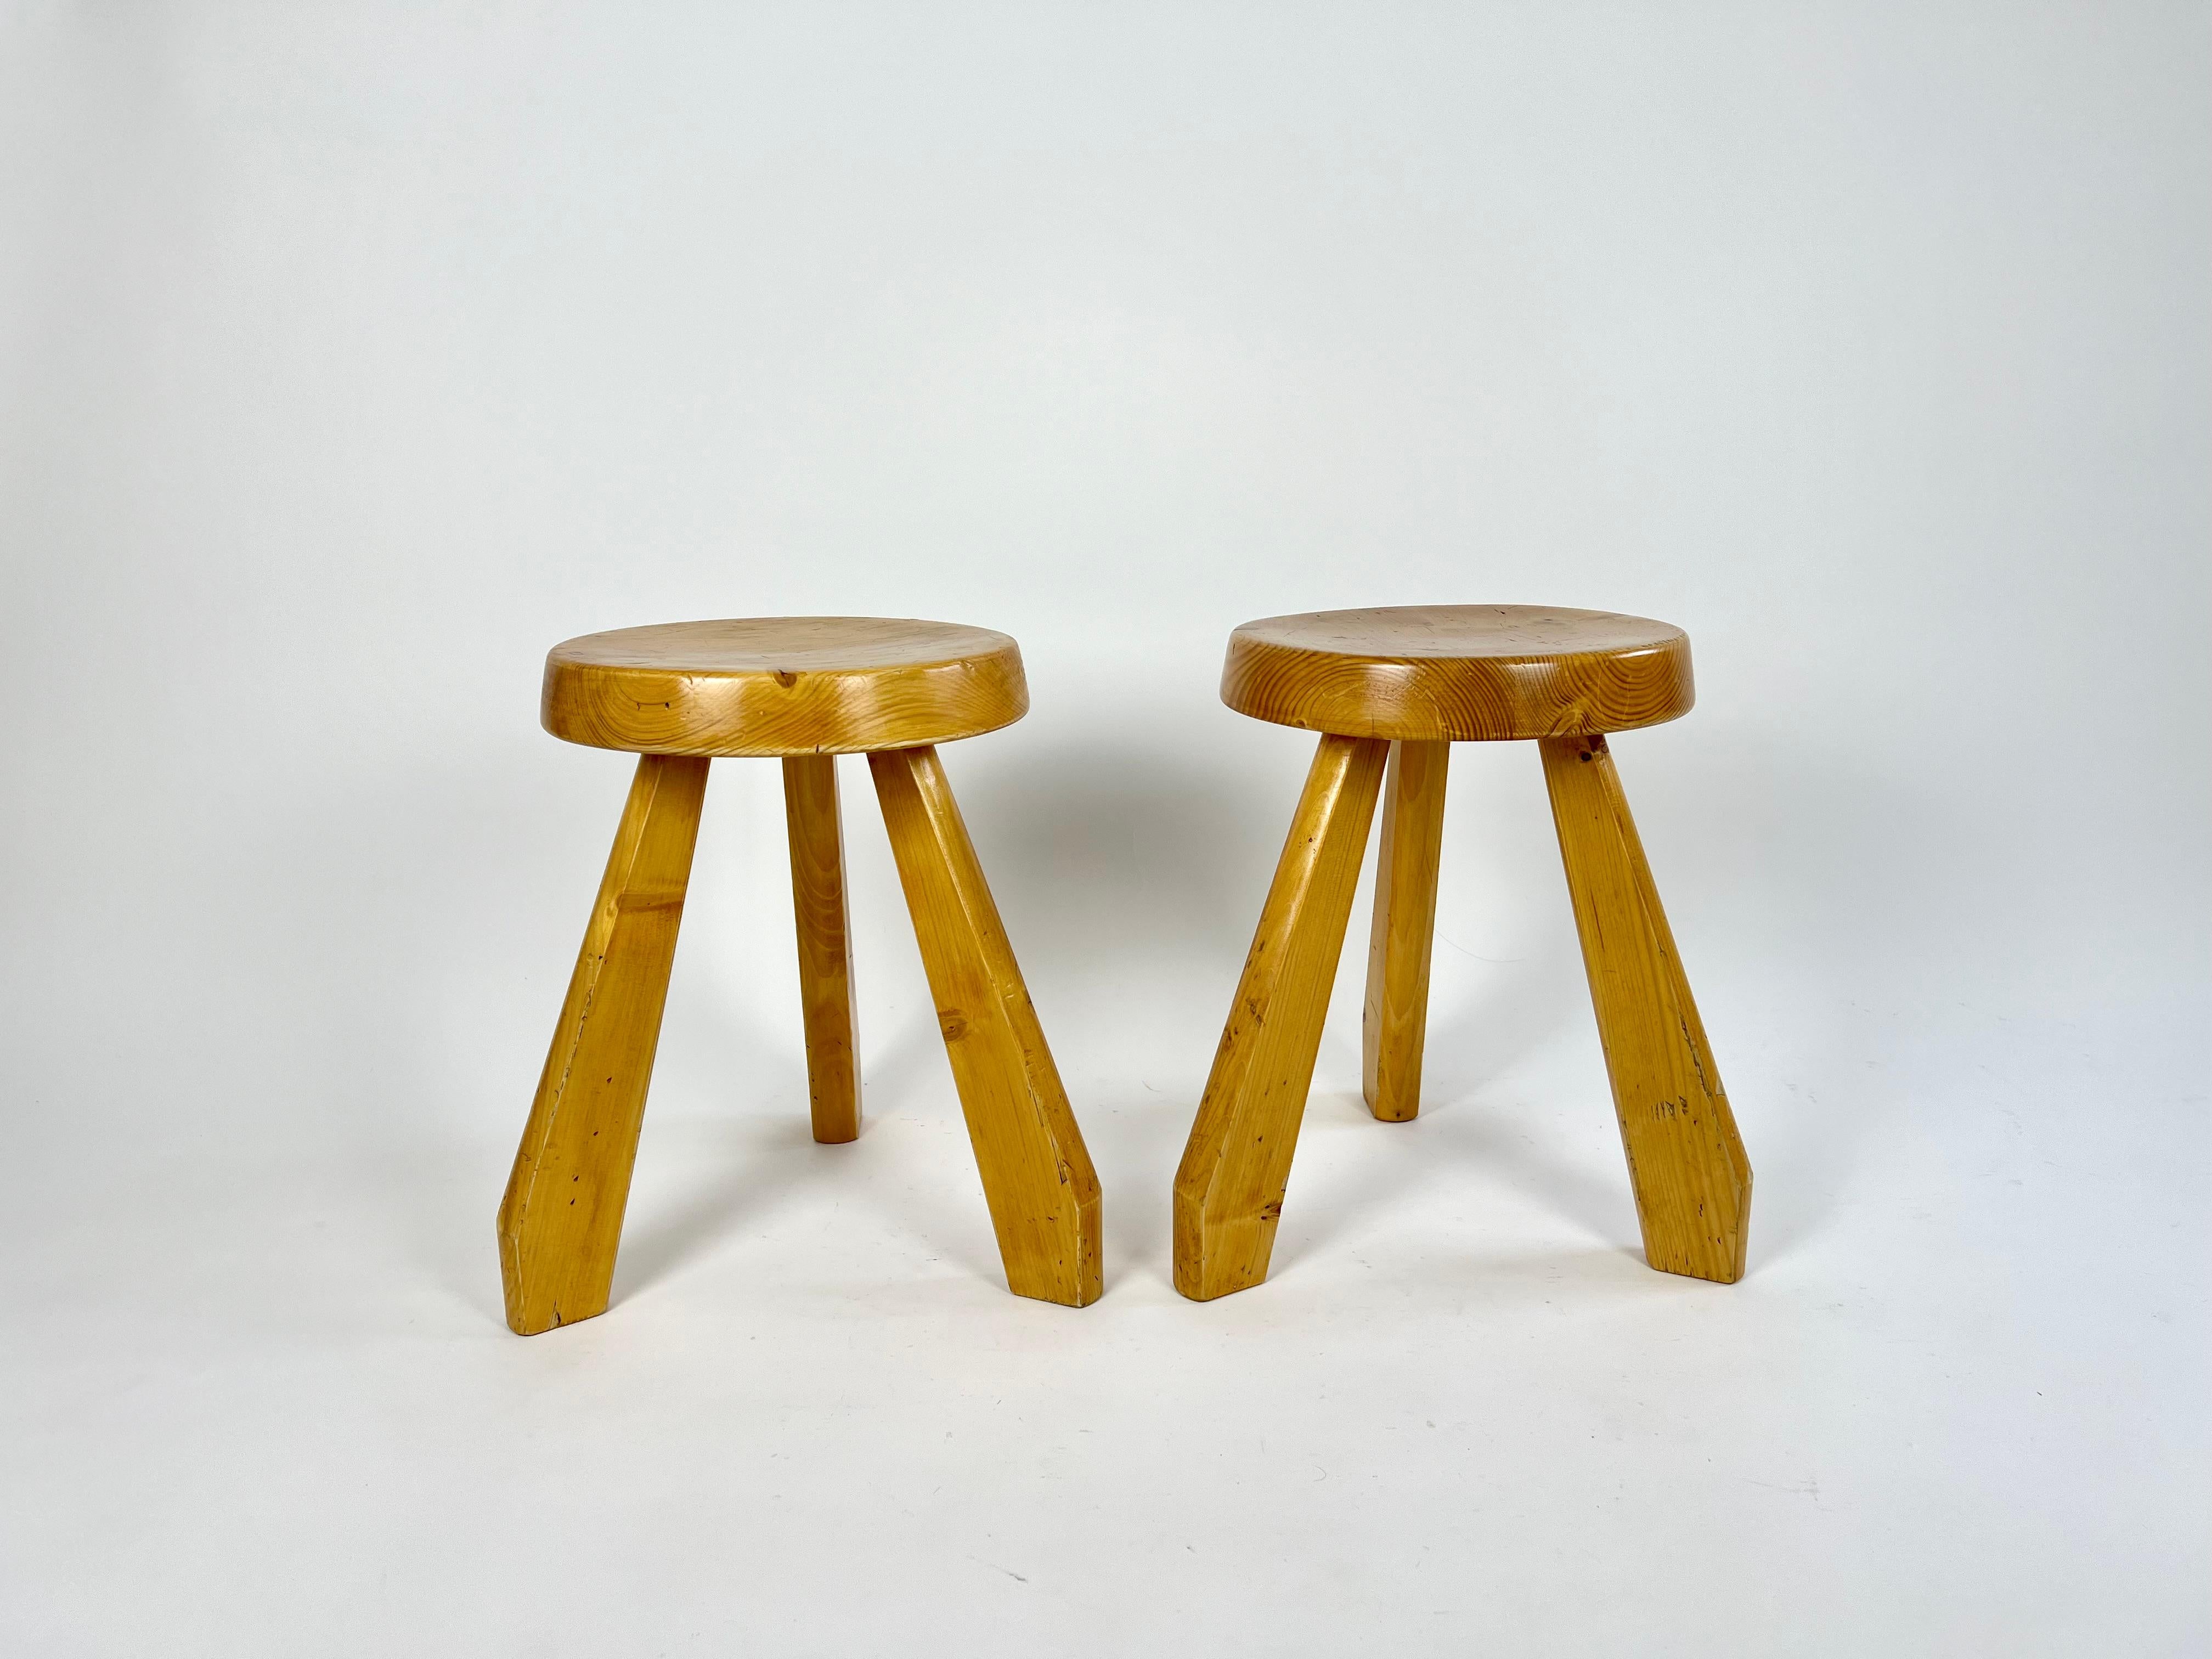 Pair of pine stools by Charlotte Perriand, circa 1960 from Les Arcs, France.

The stools were sourced from a chalet clearance in the Haute Savoie region of France.

Original condition, with signs of age and use, age related wear as pictured.